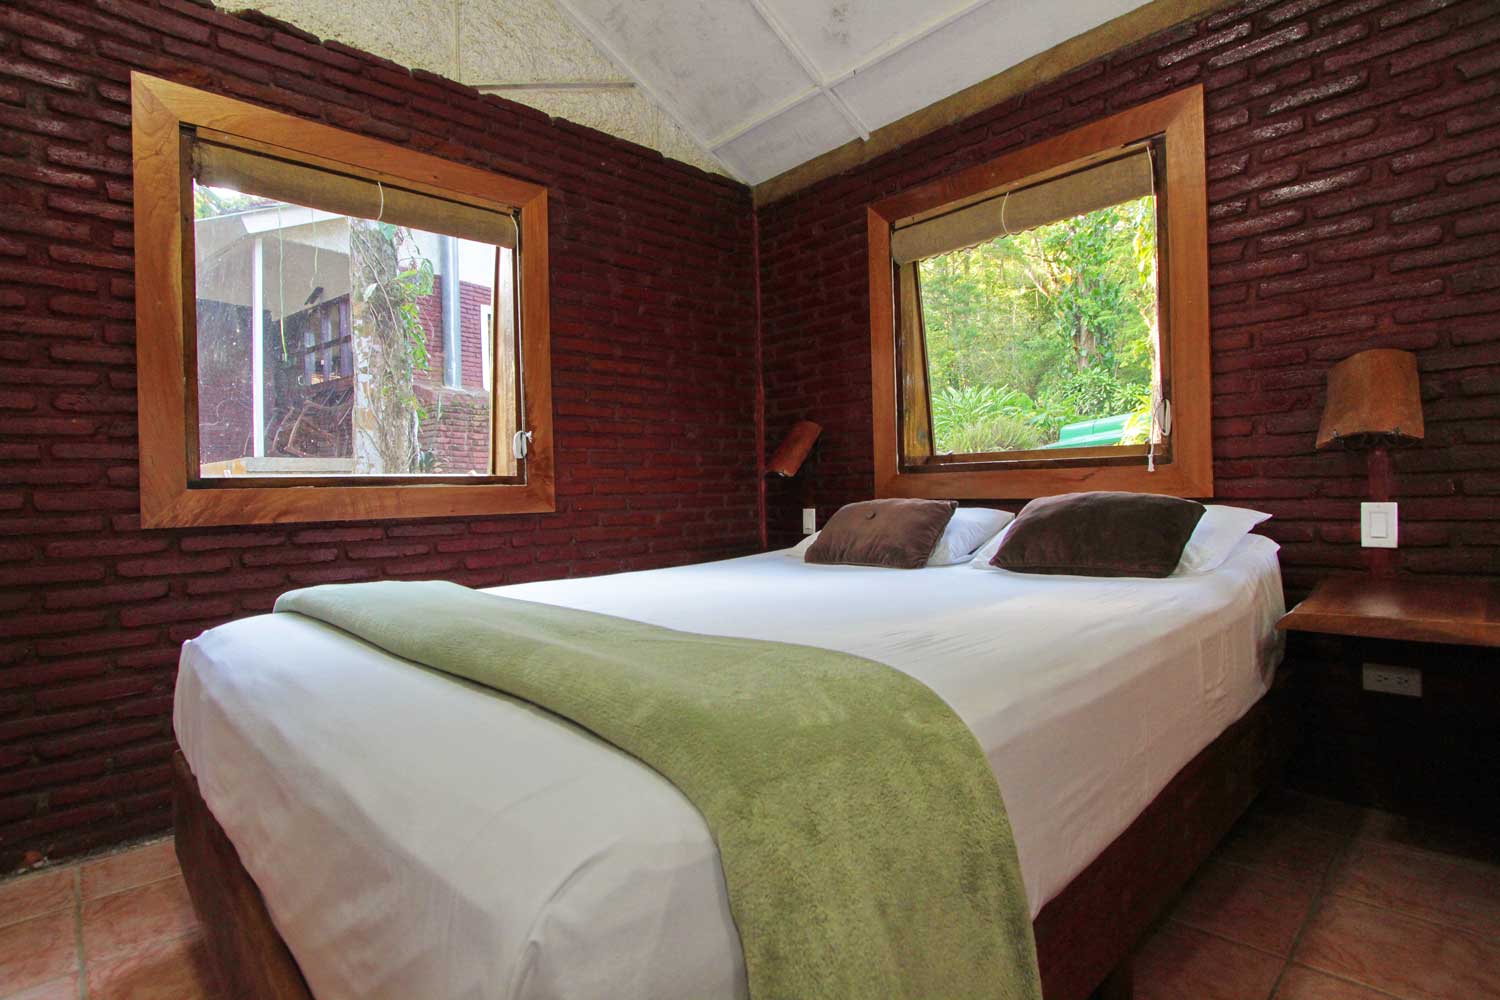 One Bedroom Bungalows Selva Negra Ecolodge Lodging